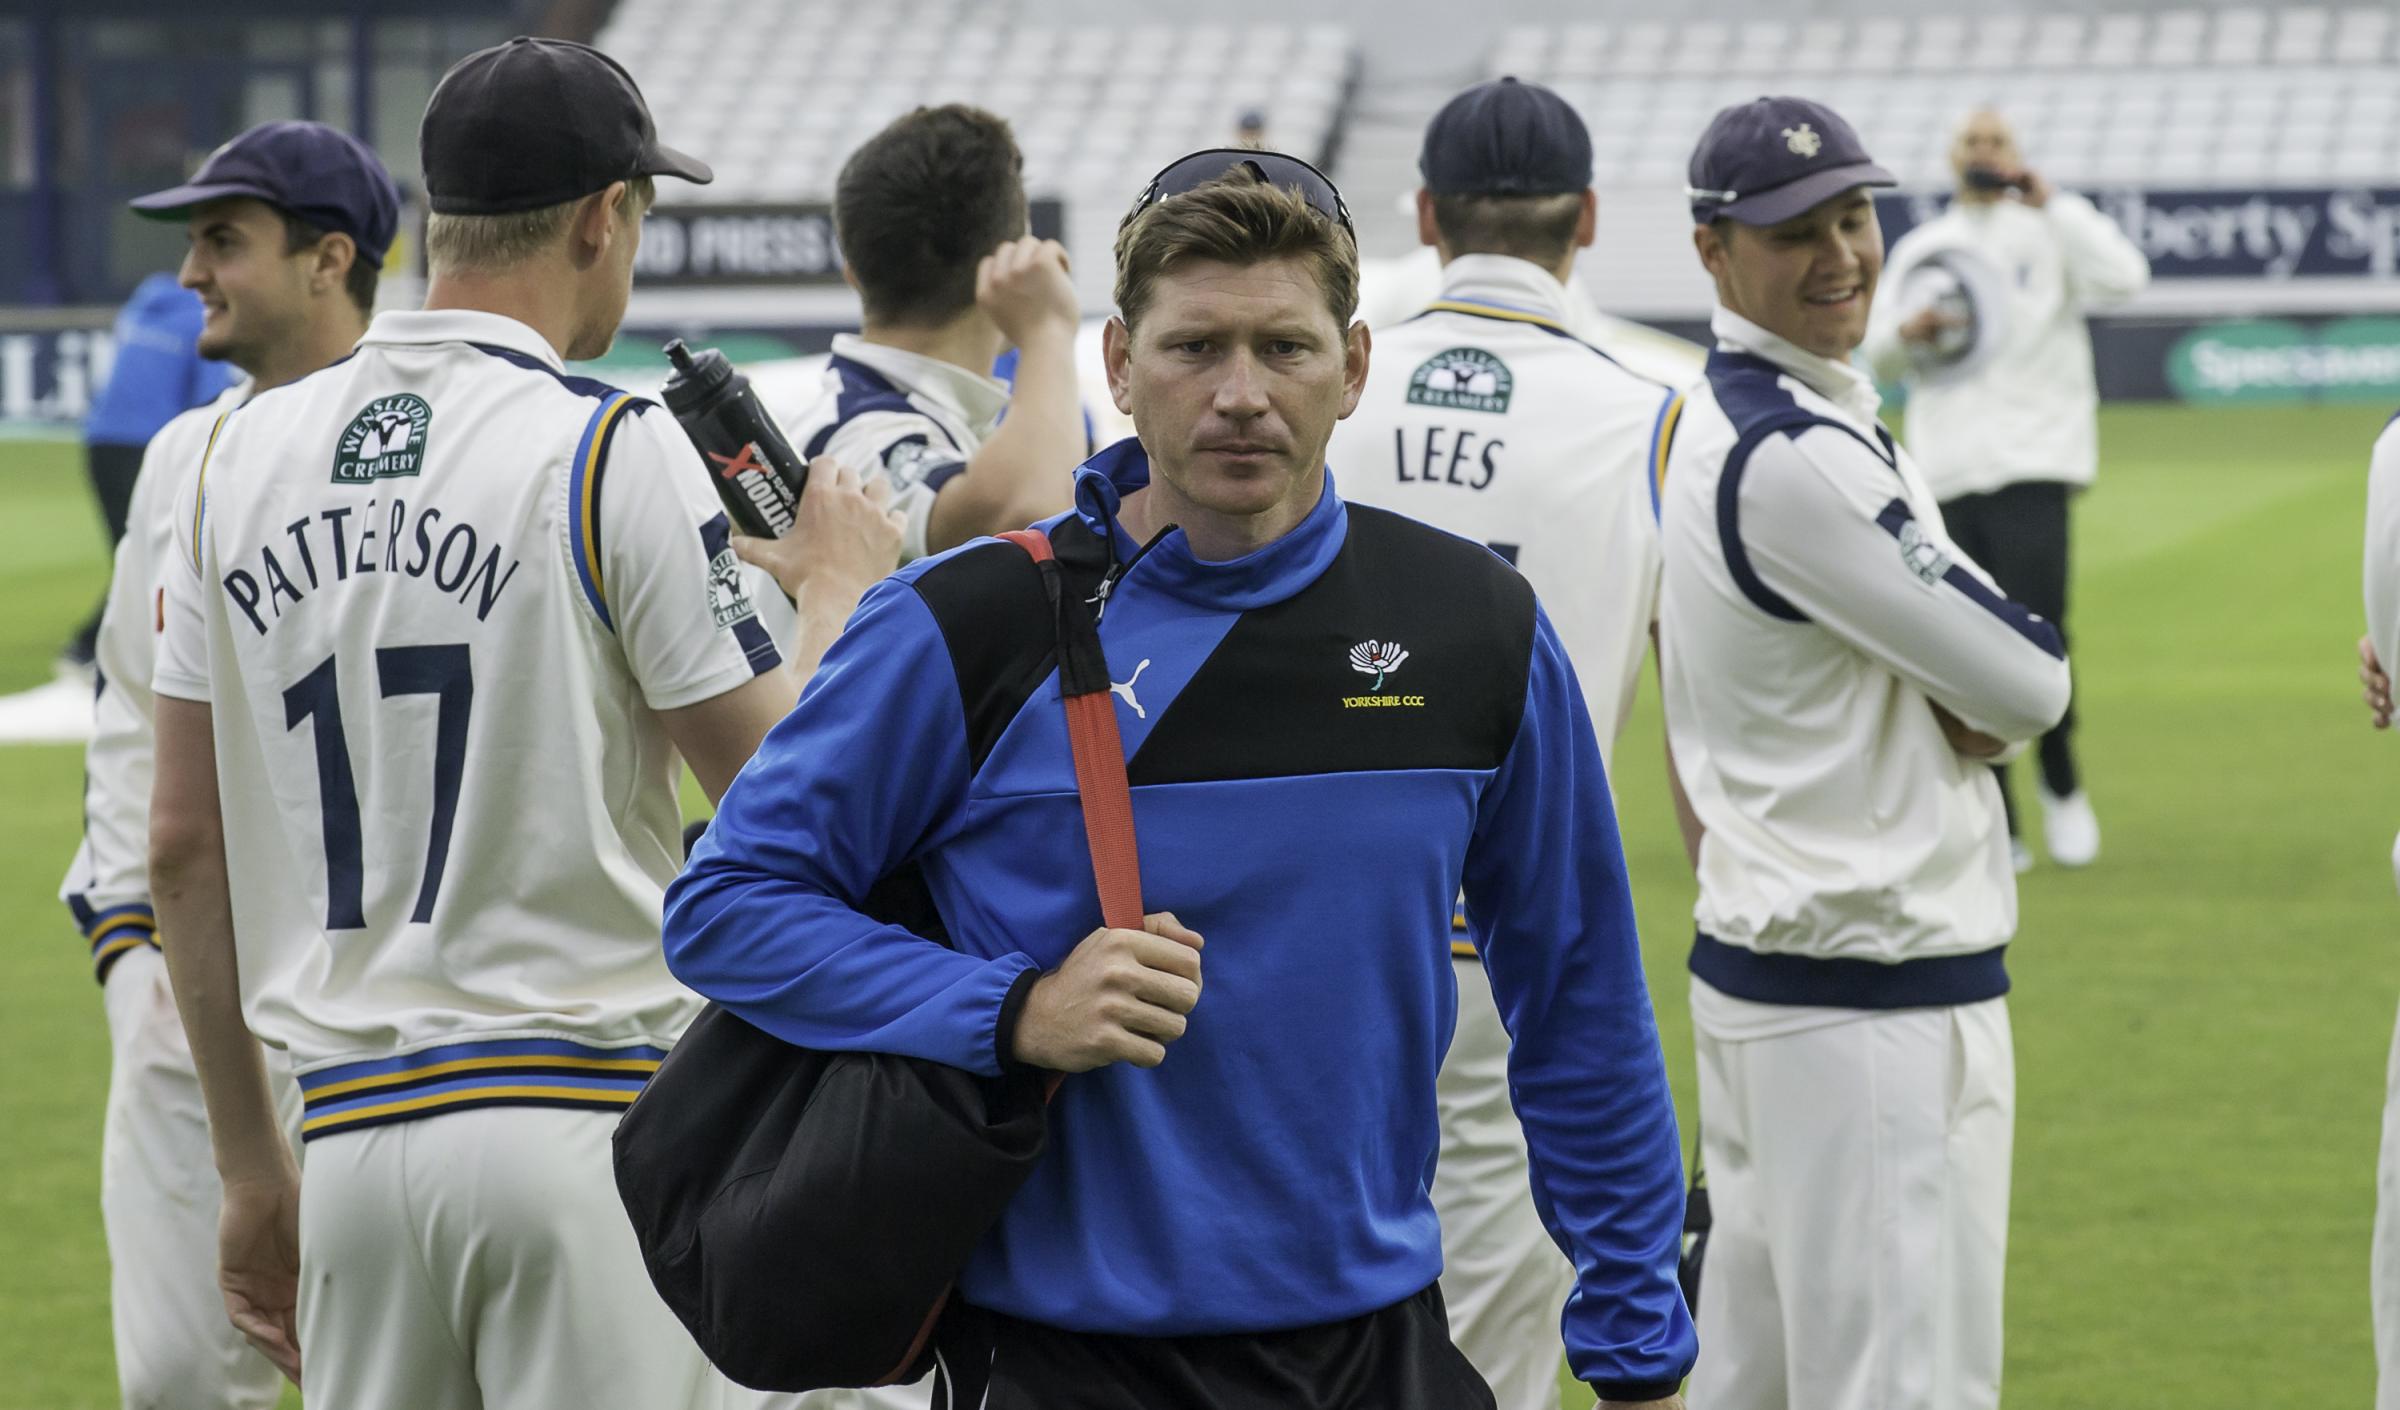 Rich Pyrah pleased to help Andrew Gale make coaching transition at Yorkshire - The Press, York